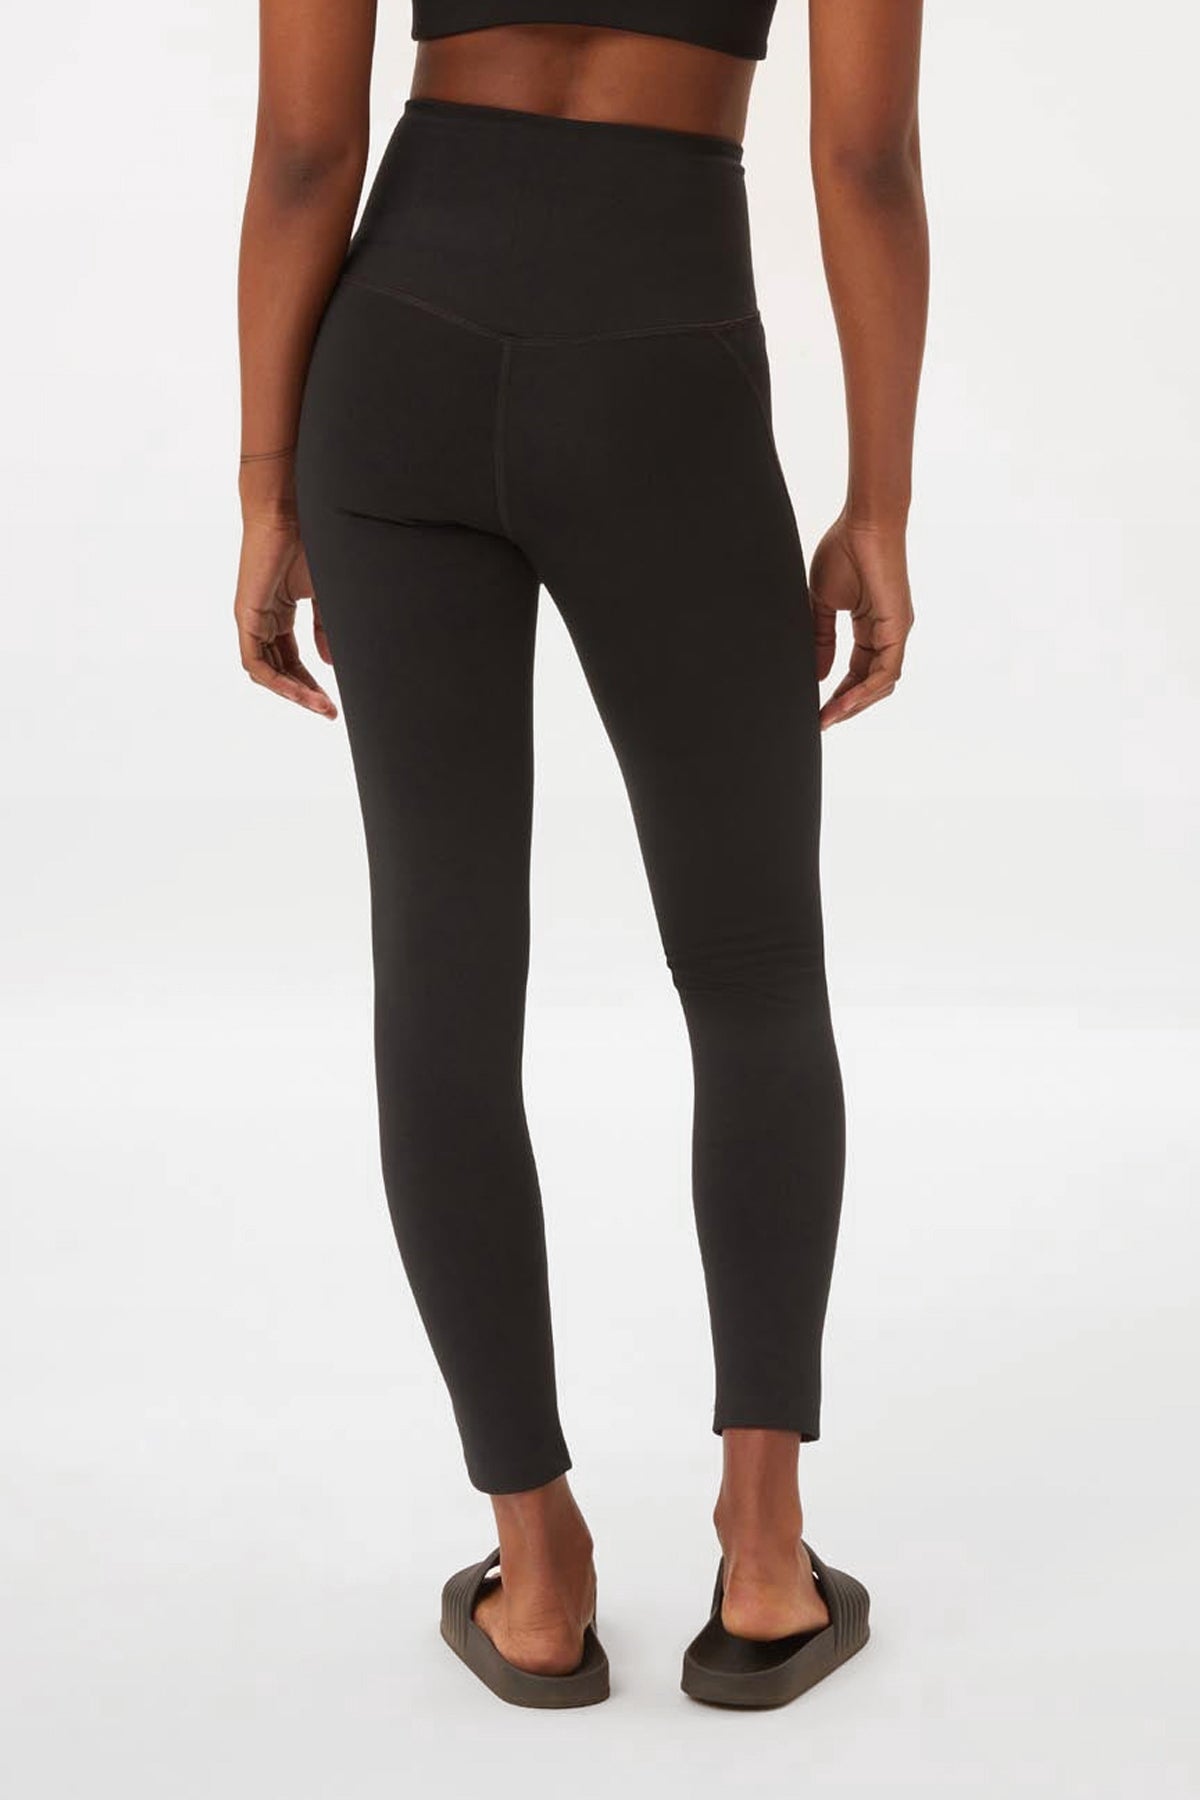 Discover Which Lululemon Leggings Offer the Most Compression